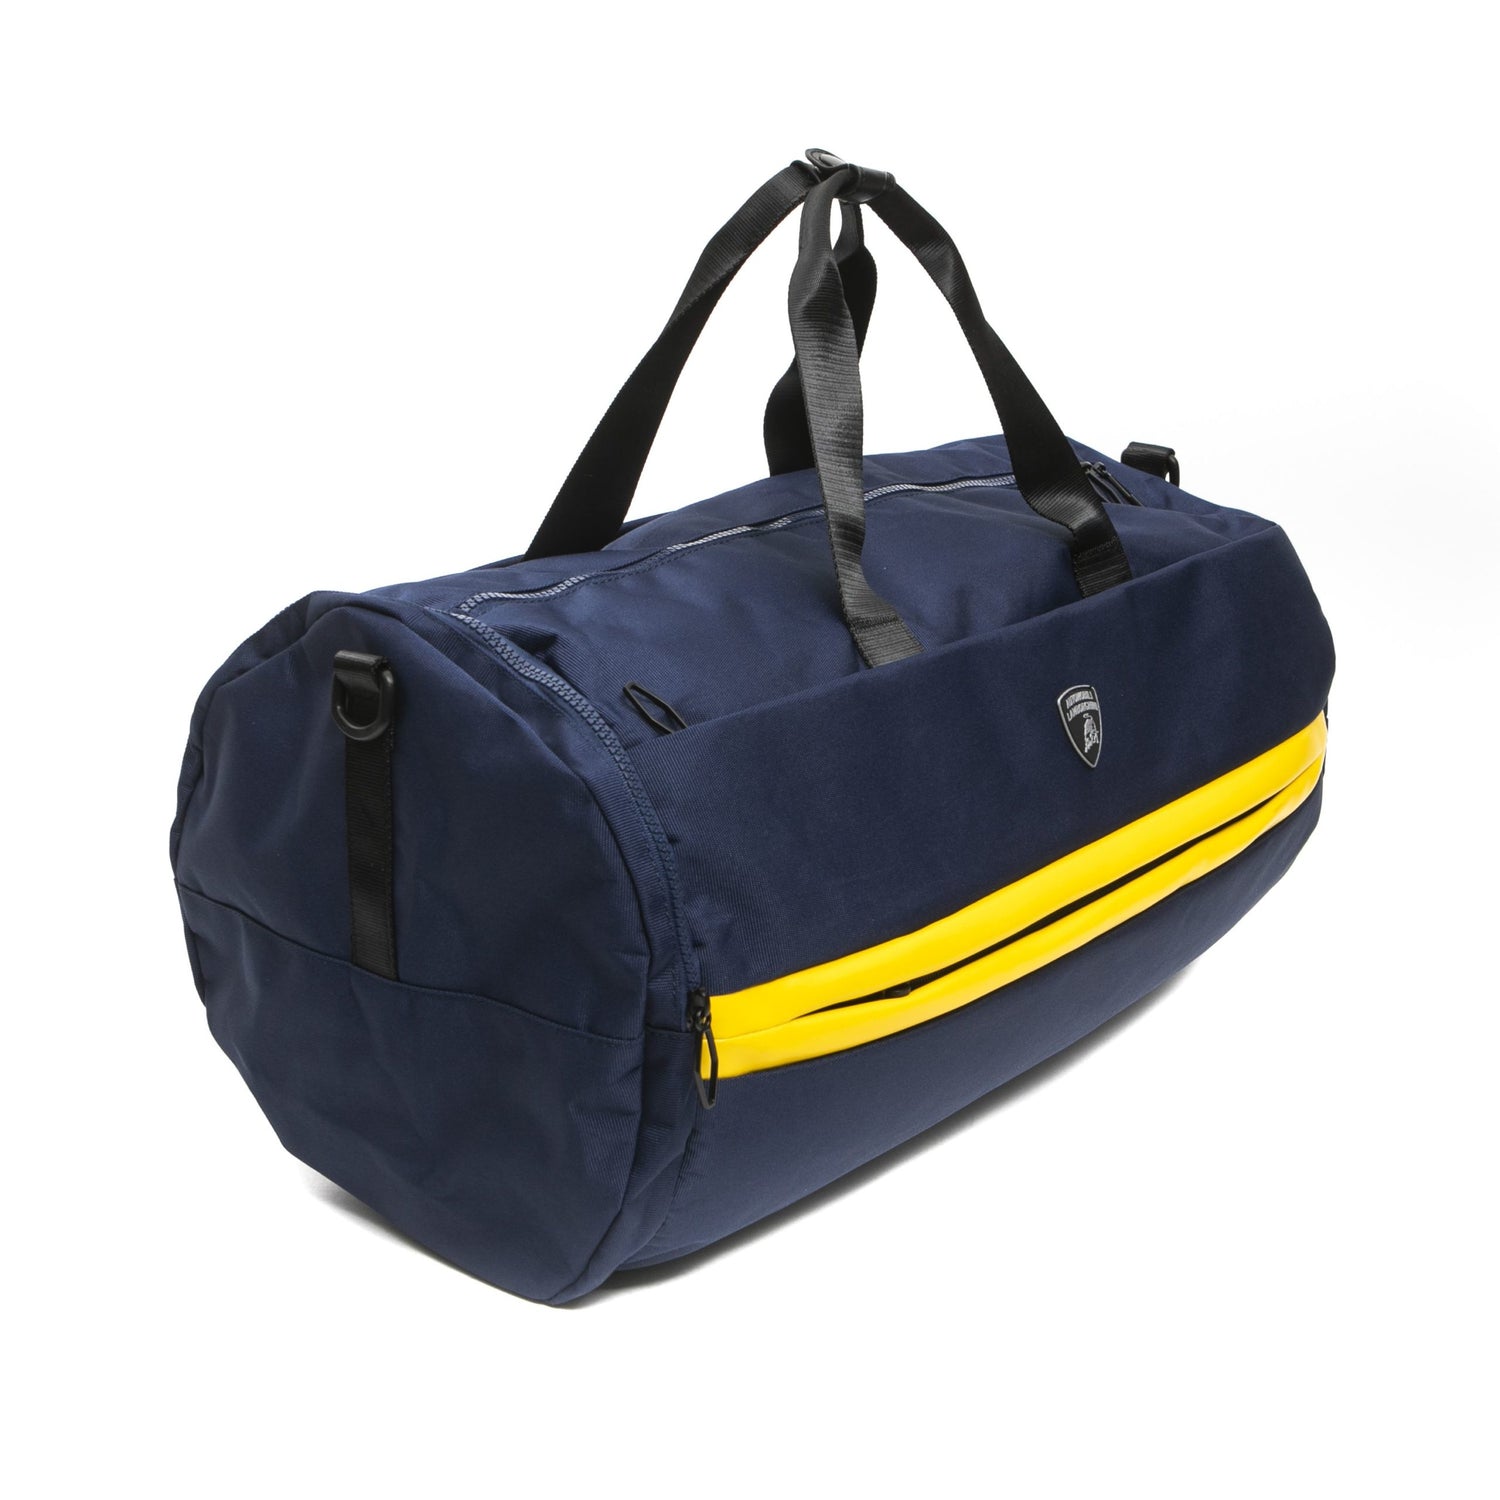 Blue Polyester Luggage and Travel